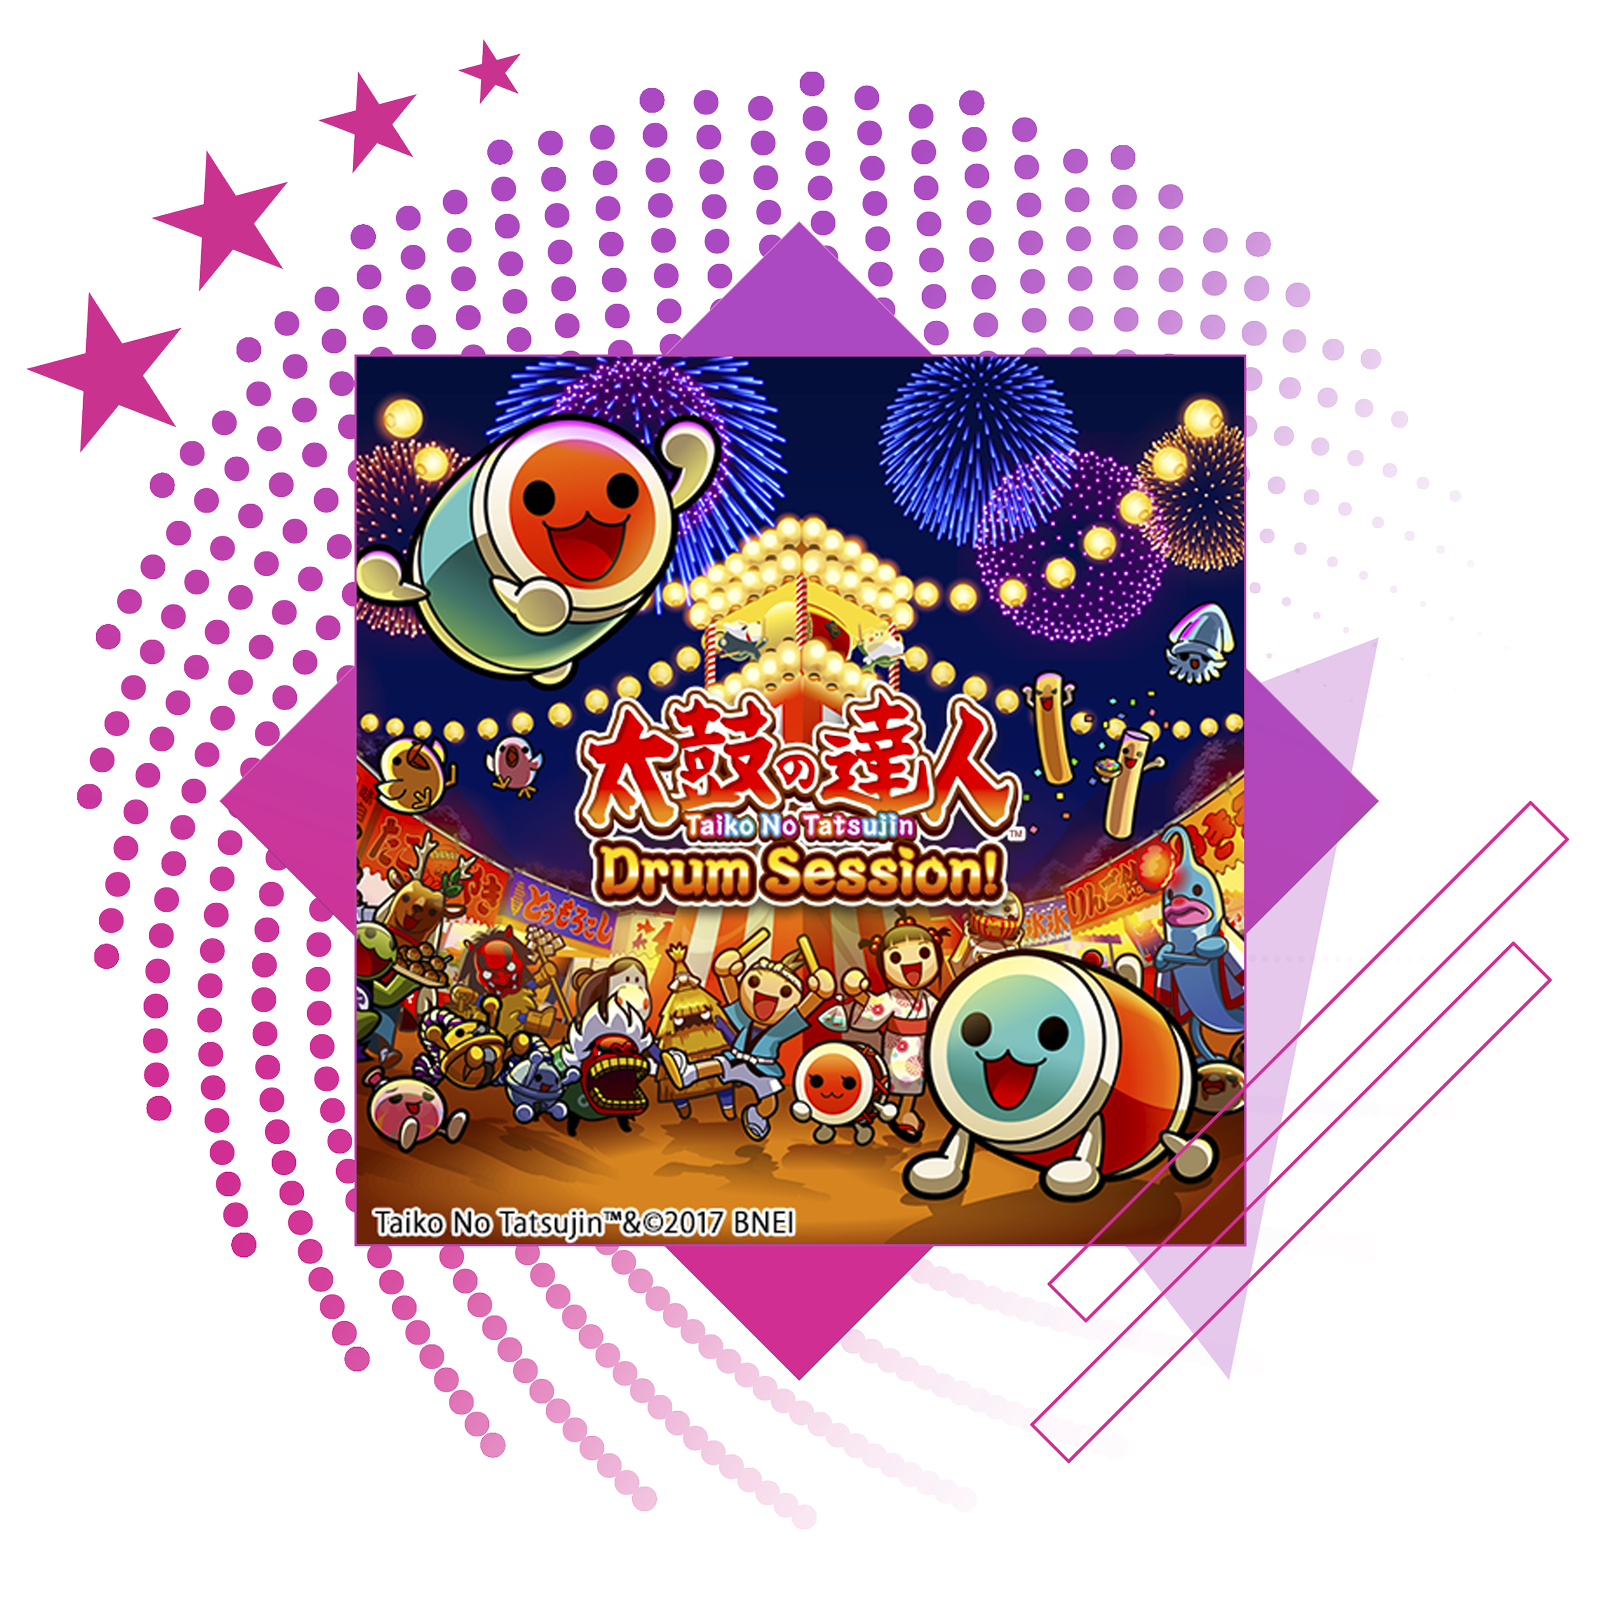 Best rhythm games feature image, featuring key art from Taiko No Tatsujin: Drumming Session.